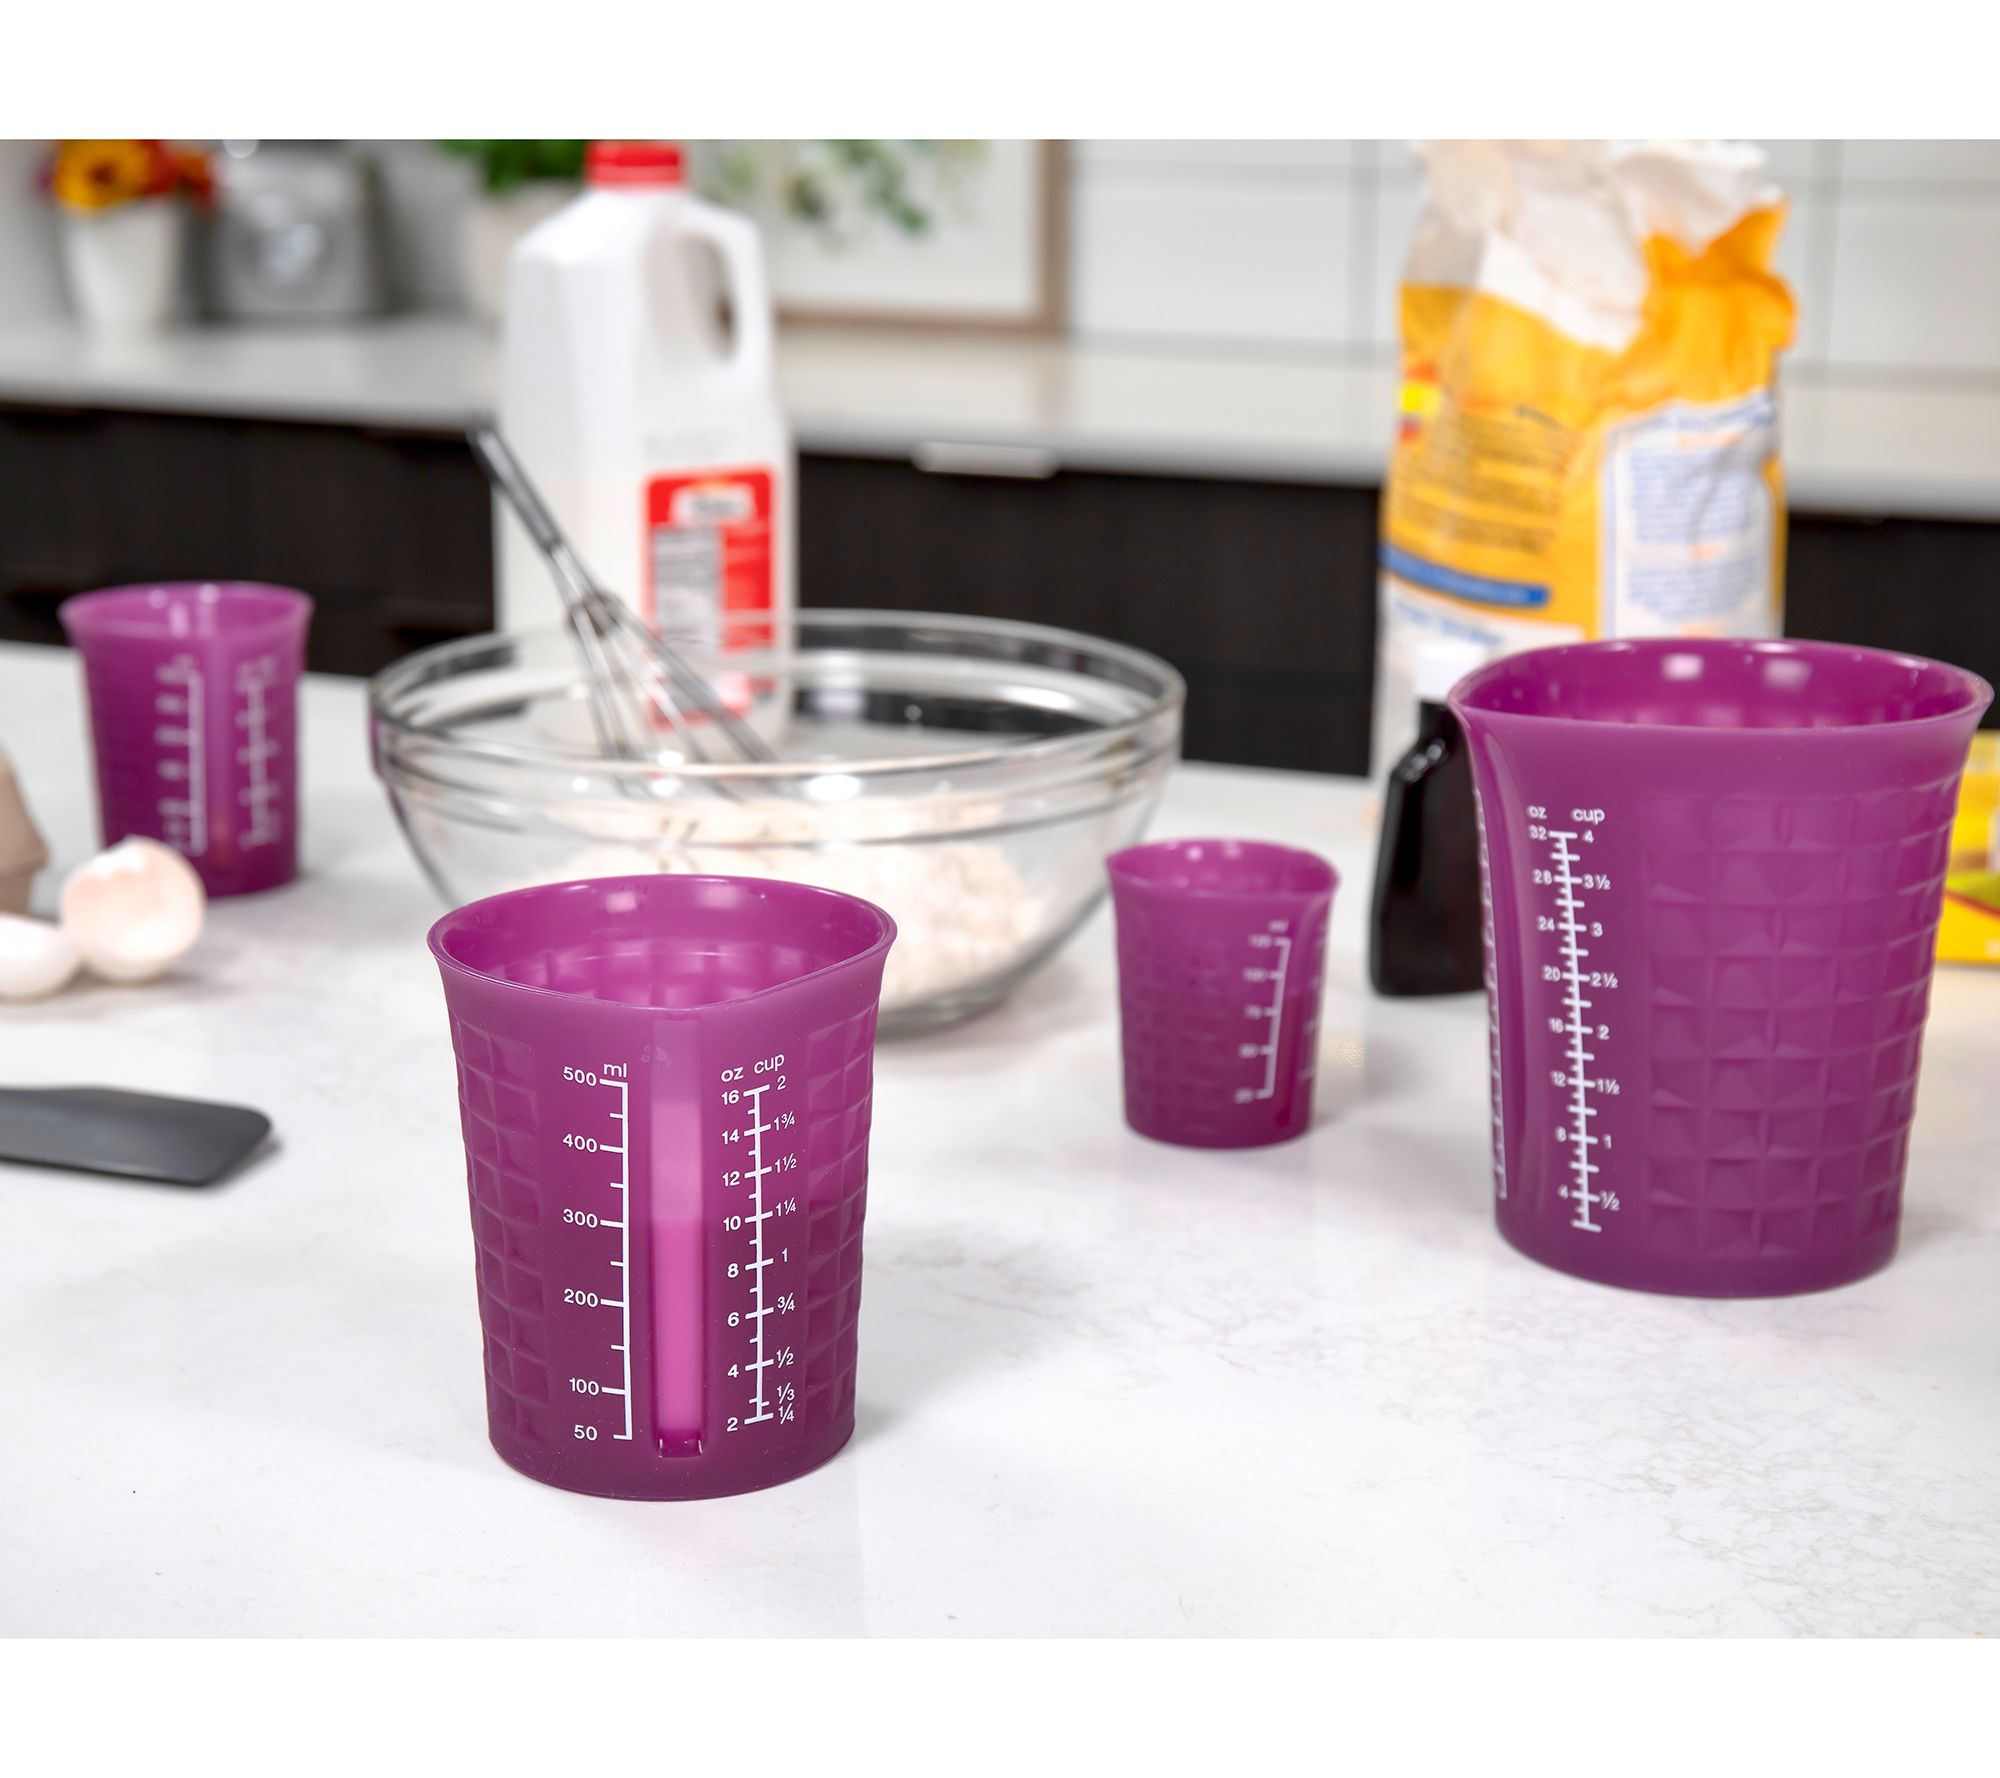 The Best-Selling Pyrex Glass Measuring Cups Are on Sale for $18